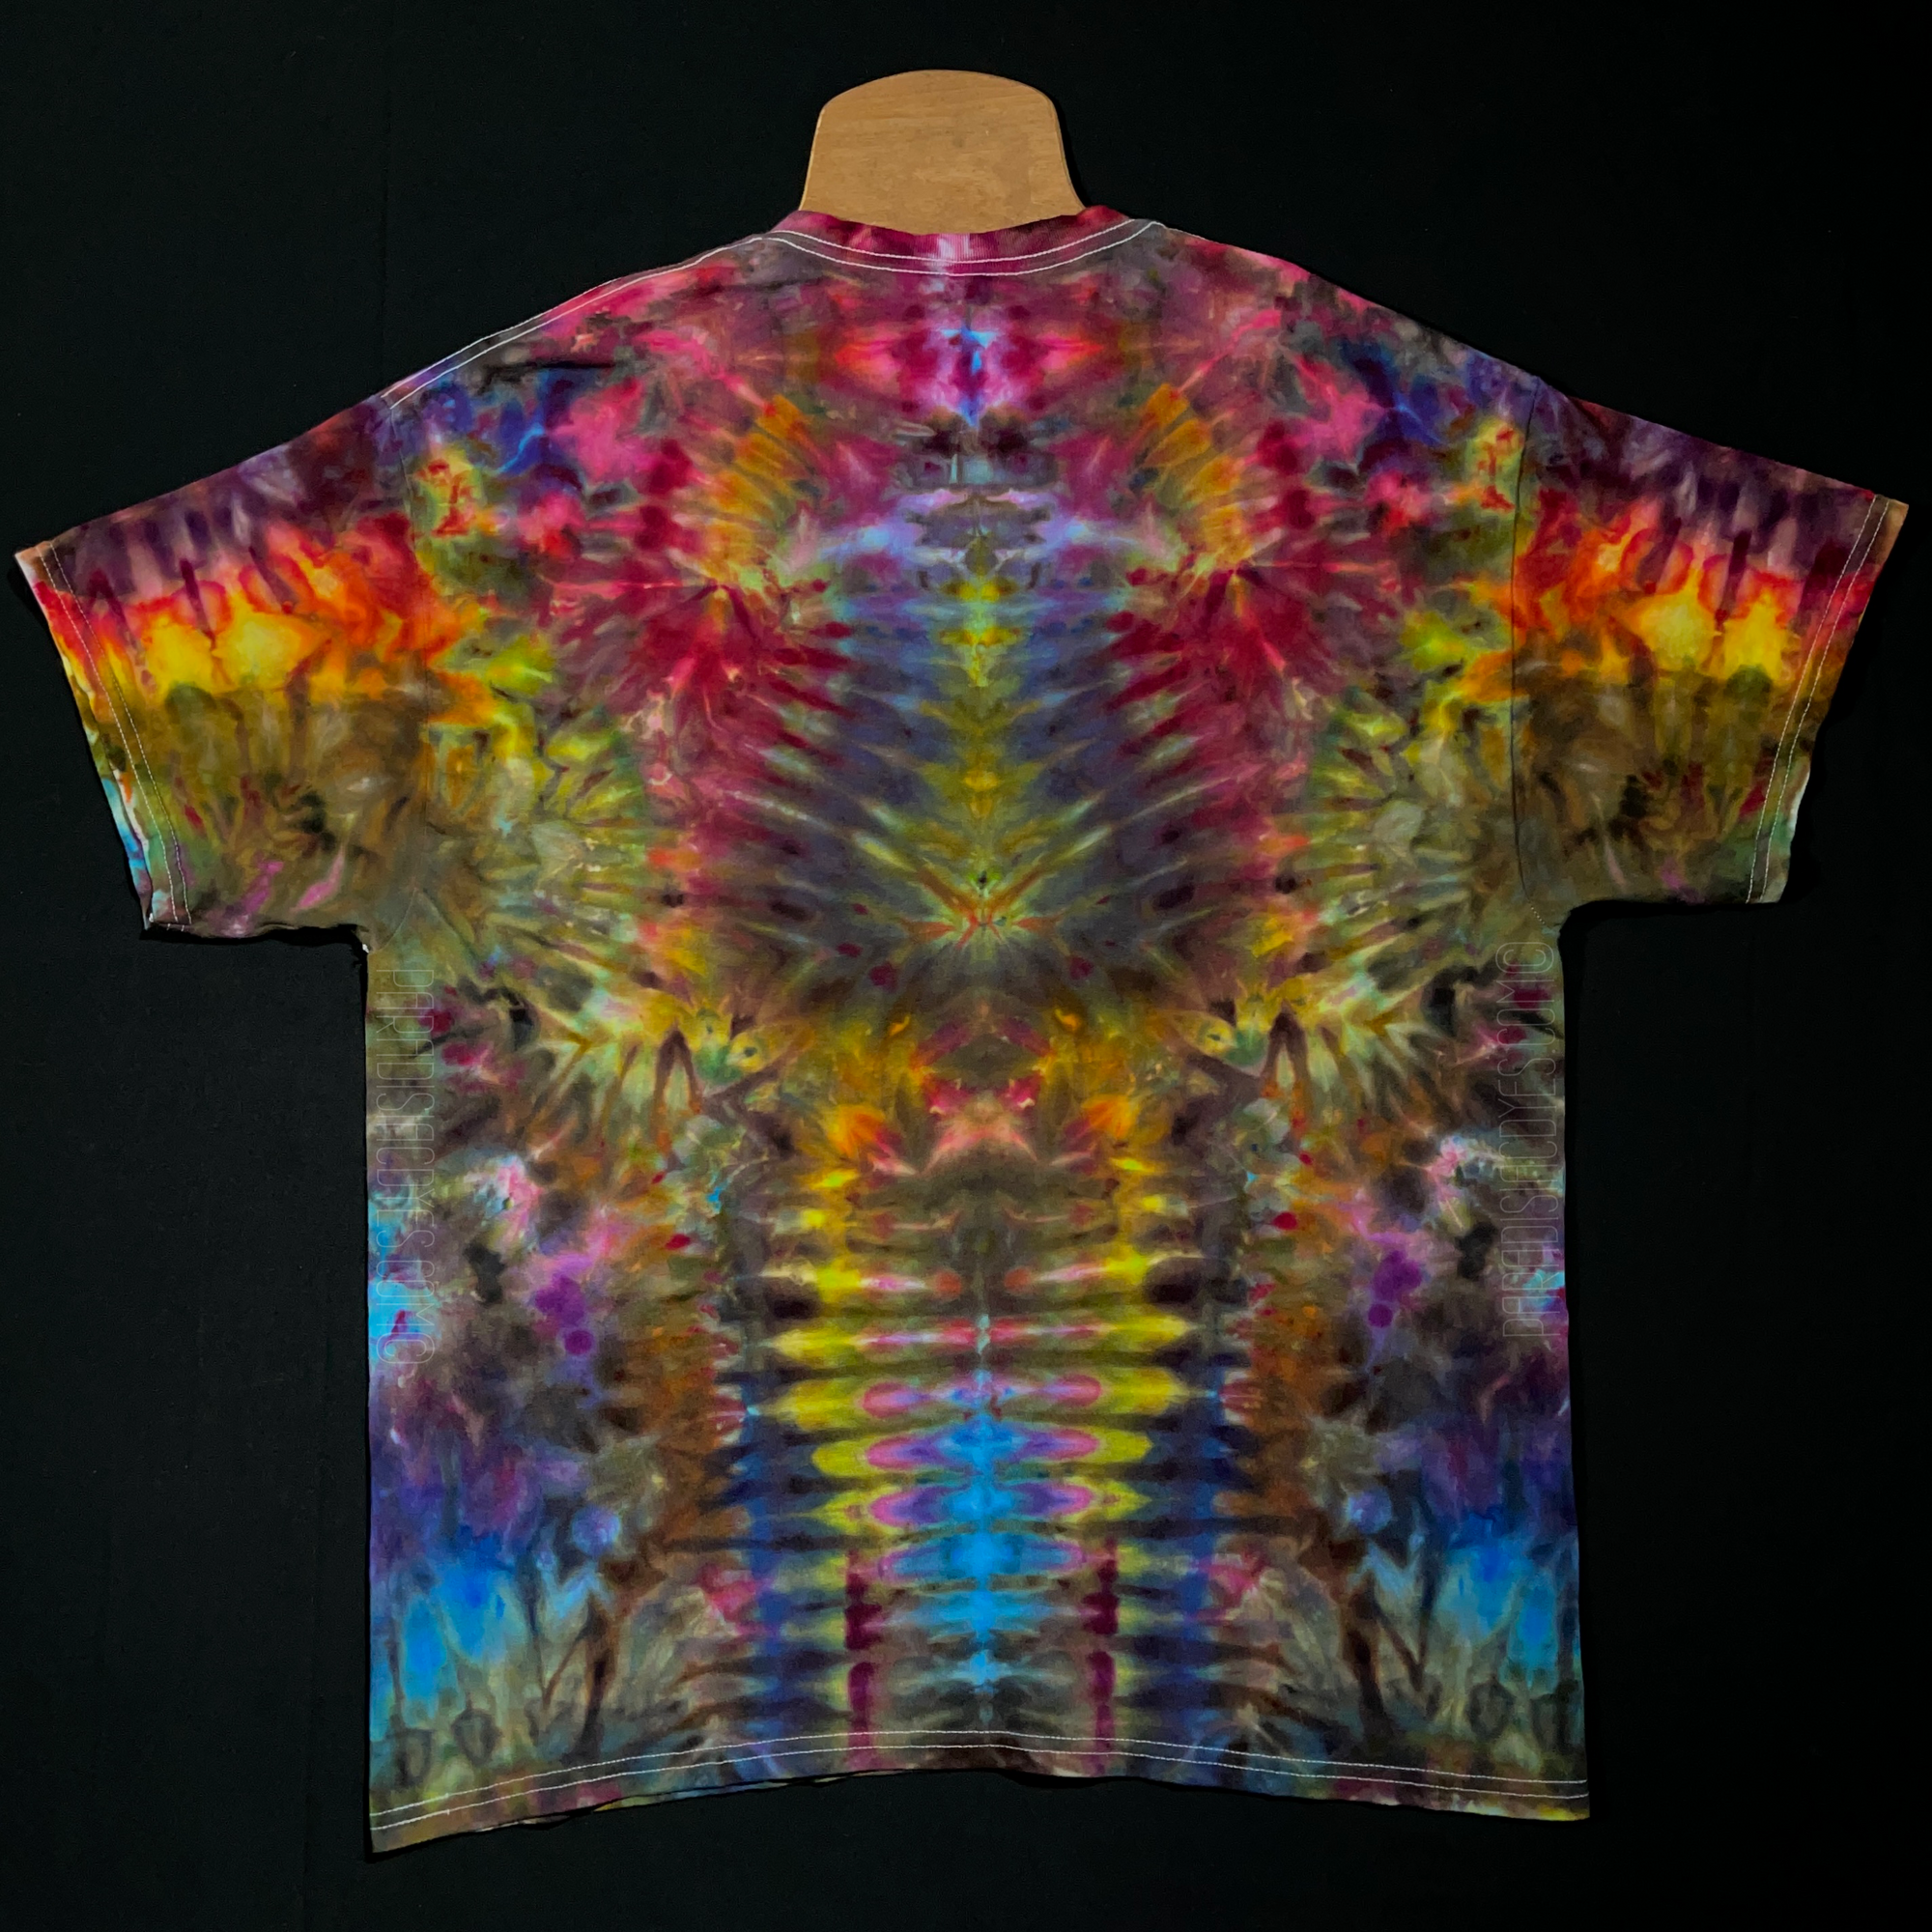 Front side of an abstract, symmetrical ice tie-dyed psychedelic mindscape short sleeve shirt design; featuring a cascading gradient of rainbow colors from top to bottom in a totem pole reminiscent pattern